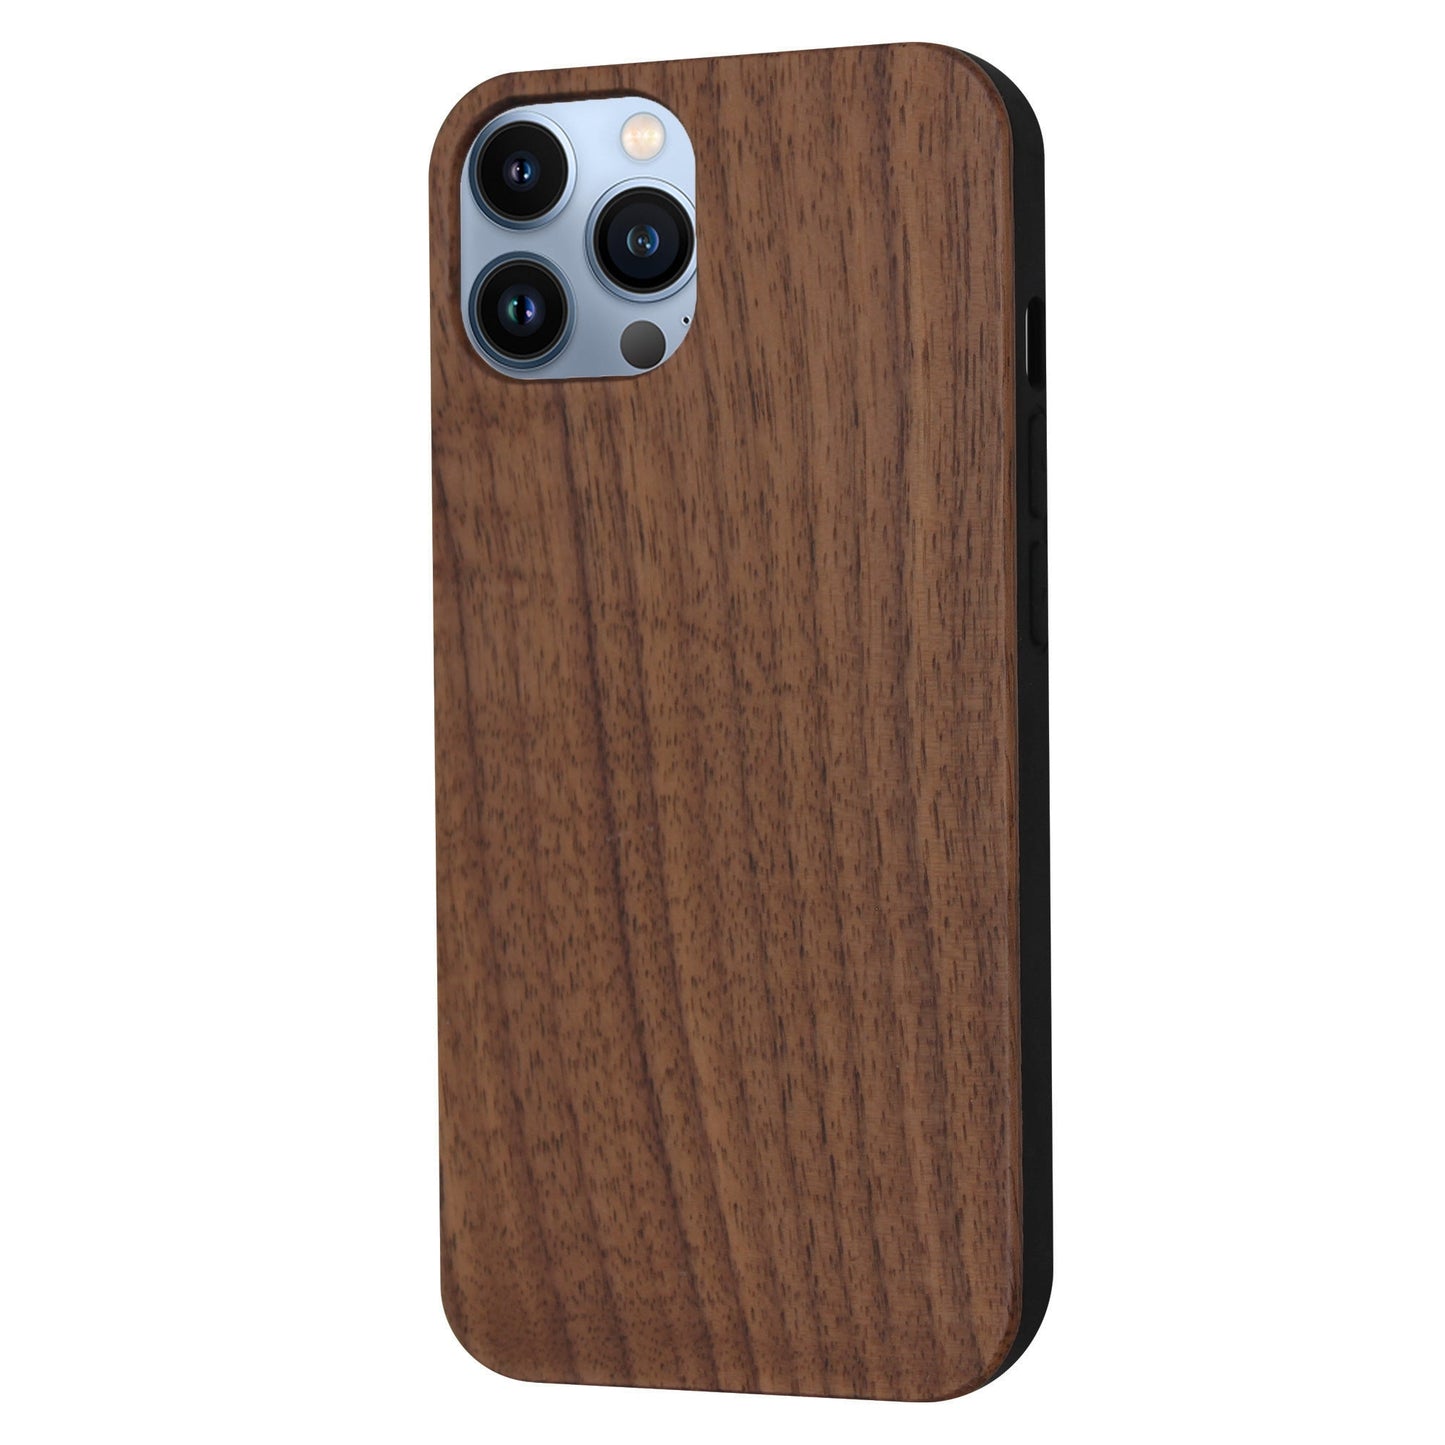 Eden case made of walnut wood for iPhone 13 Pro Max